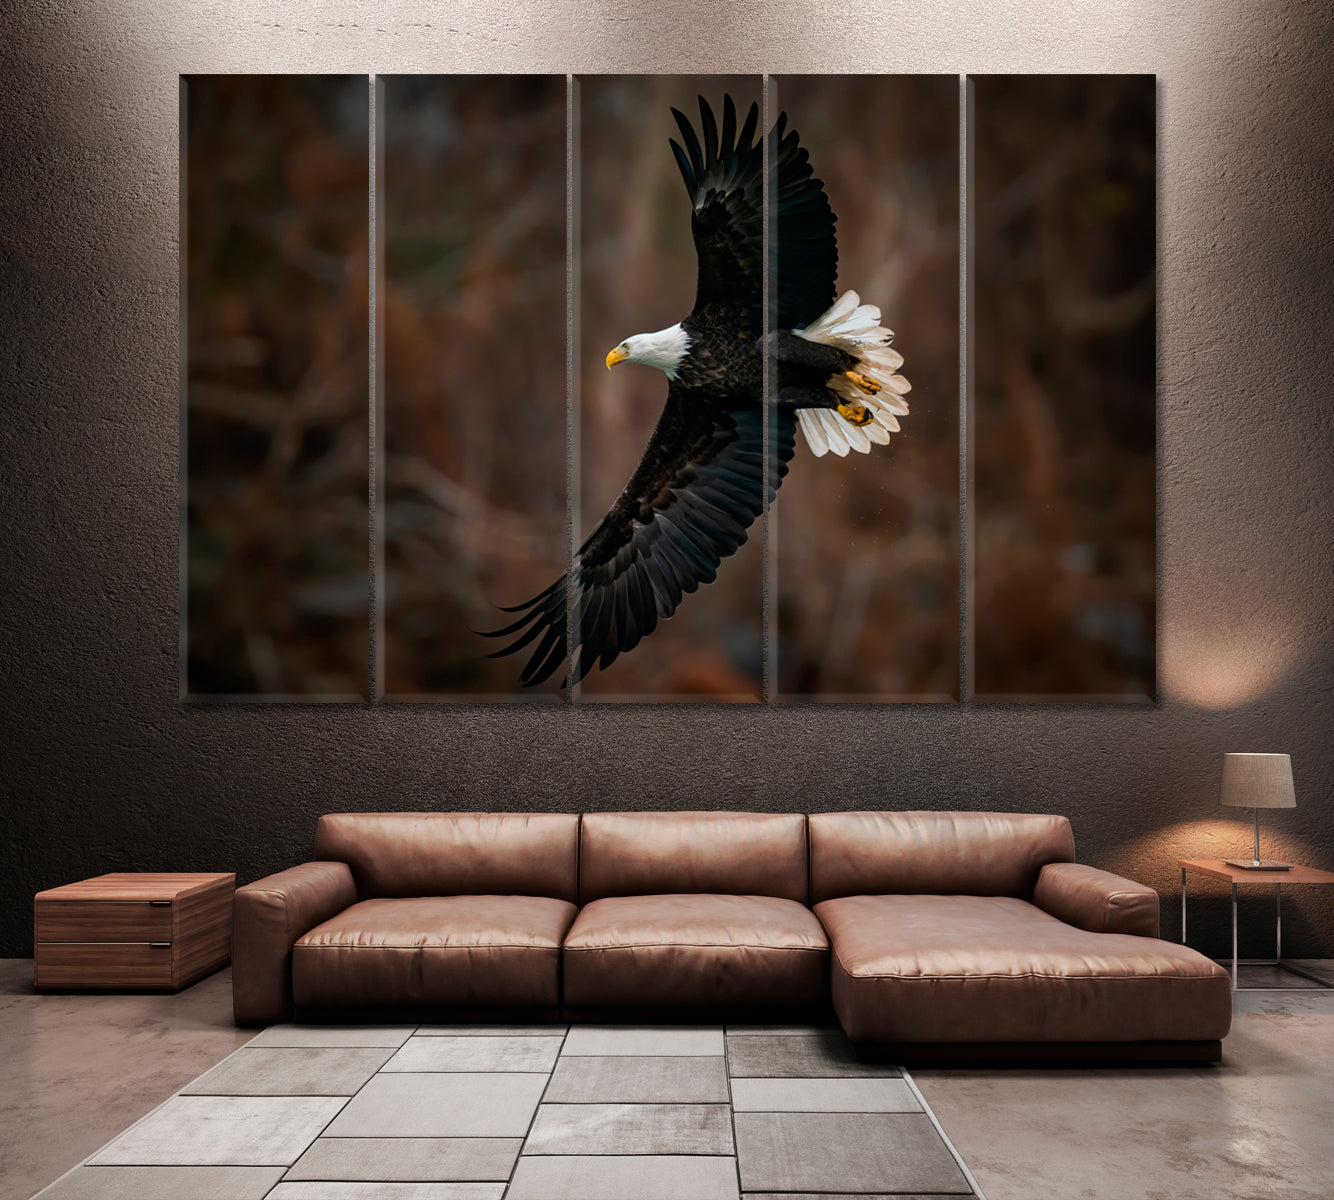 Flight of Bald Eagle in Maryland Canvas Print ArtLexy 5 Panels 36"x24" inches 